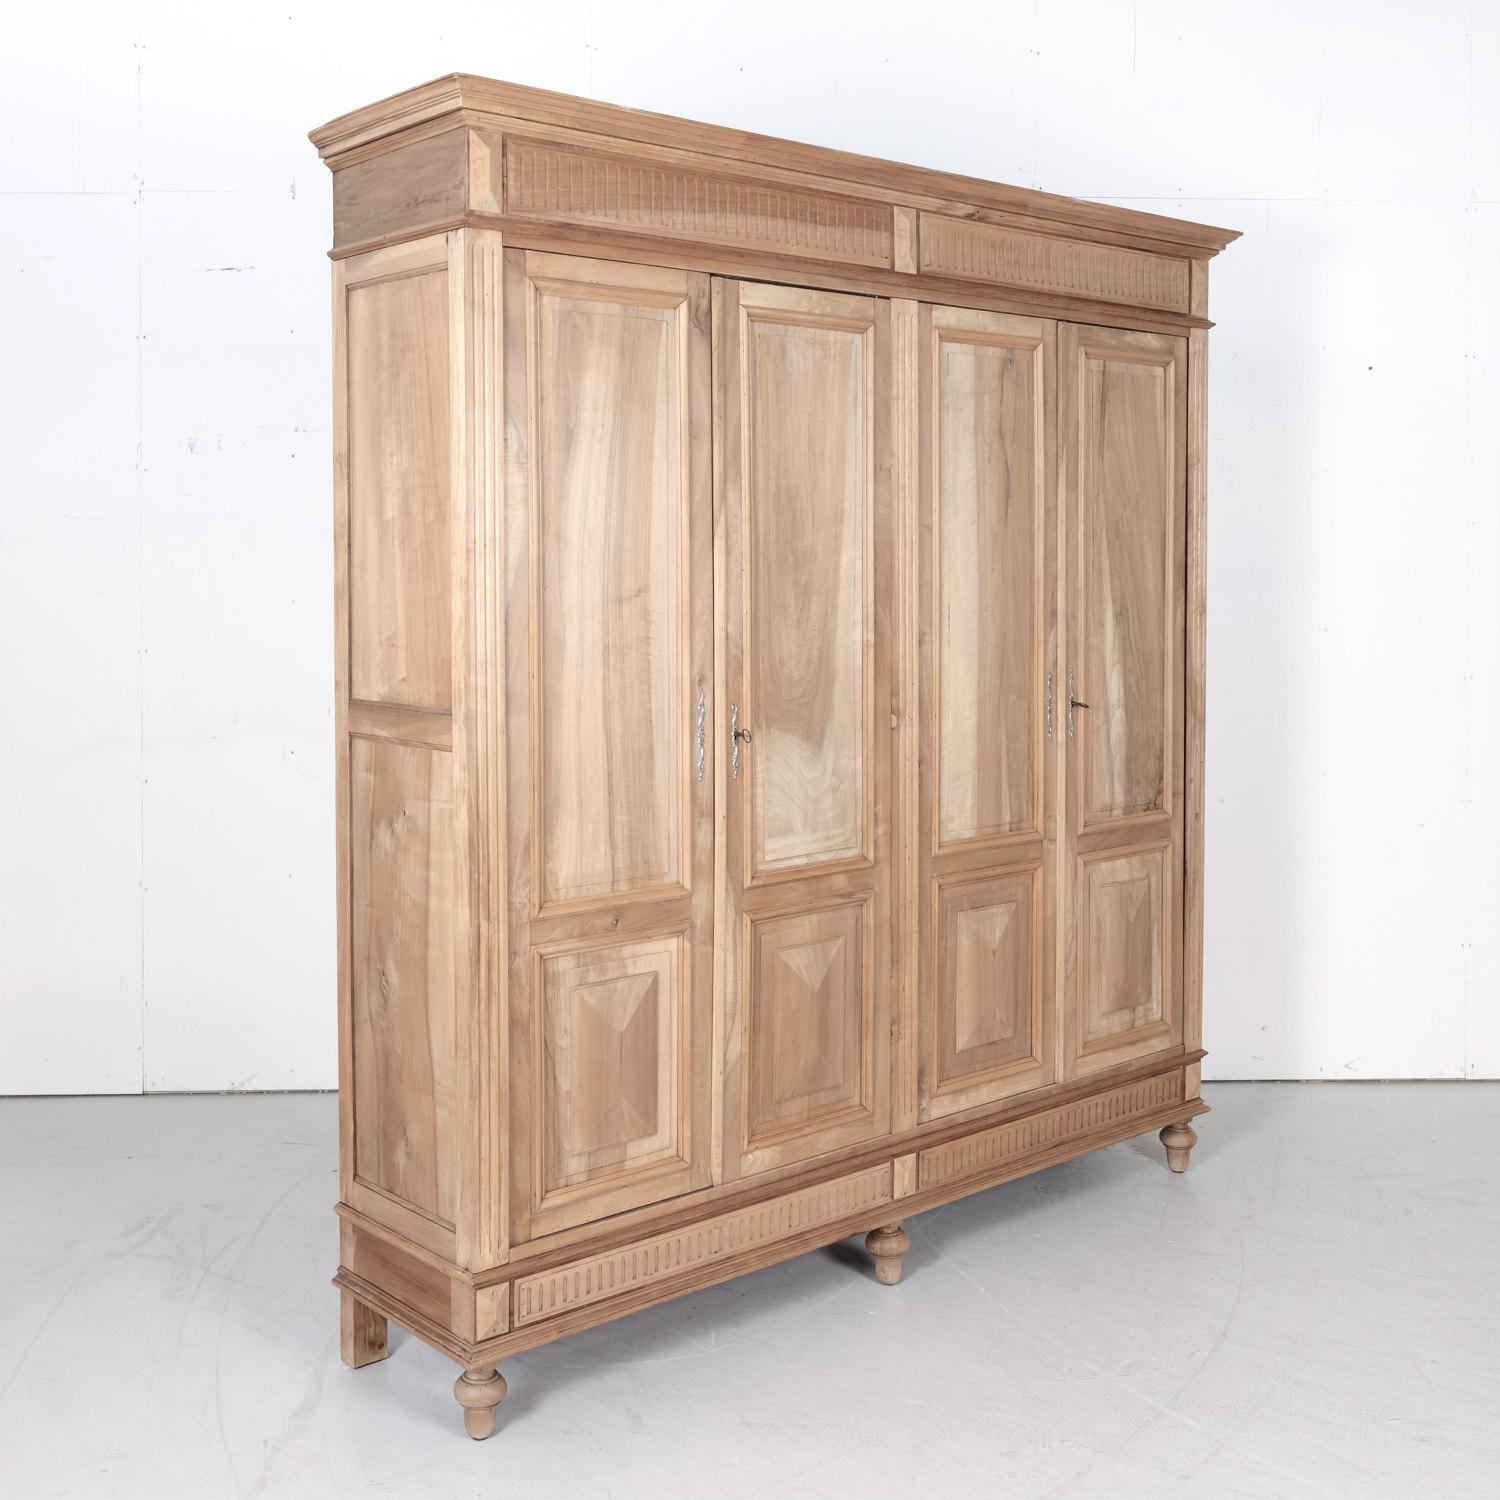 Large 19th century French Henri II or Renaissance Revival period four-door placard or armoire handcrafted in Provence of solid walnut that's been bleached or washed to a natural finish, circa 1880s. This beautiful bleached placard features a